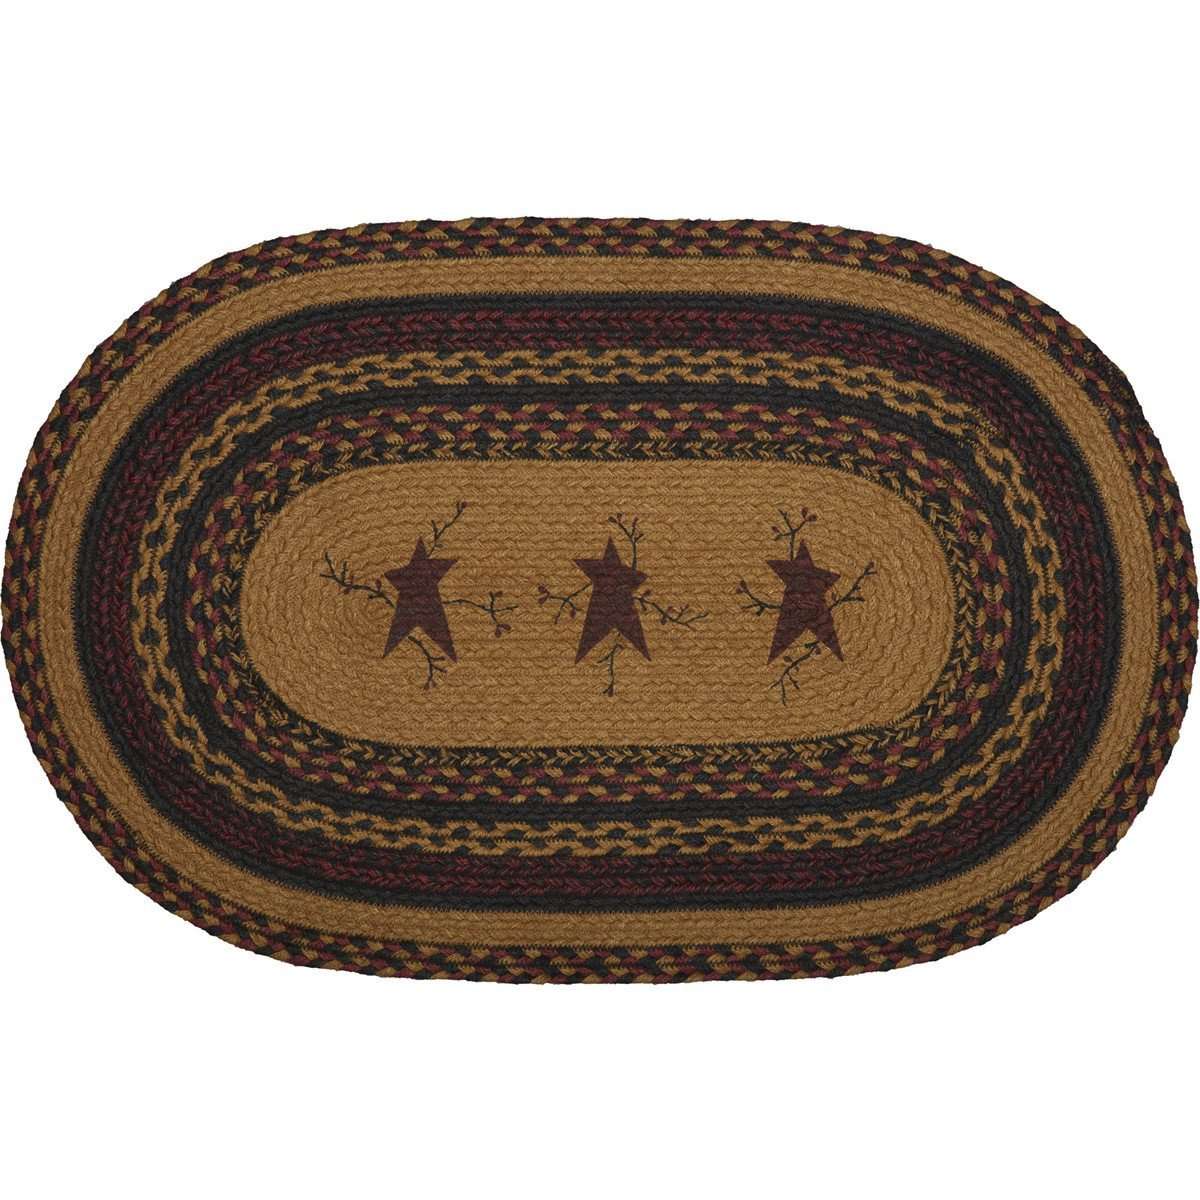 Heritage Farms Star and Pip Jute Braided Rug Oval rugs VHC Brands 20x30 inch 